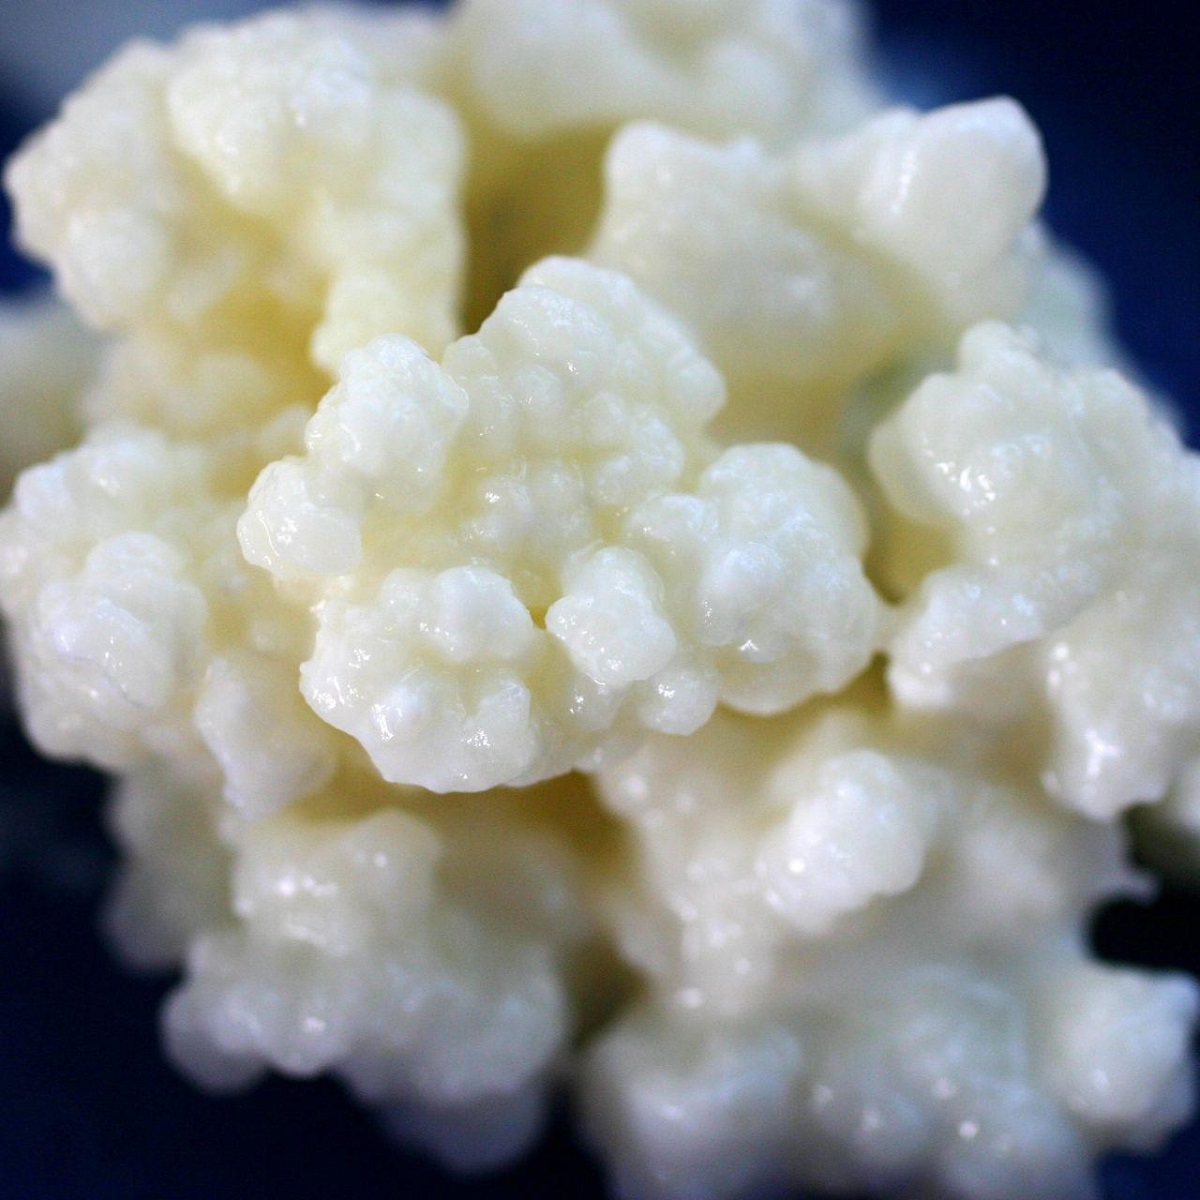 How To Store Kefir Grains Without Milk